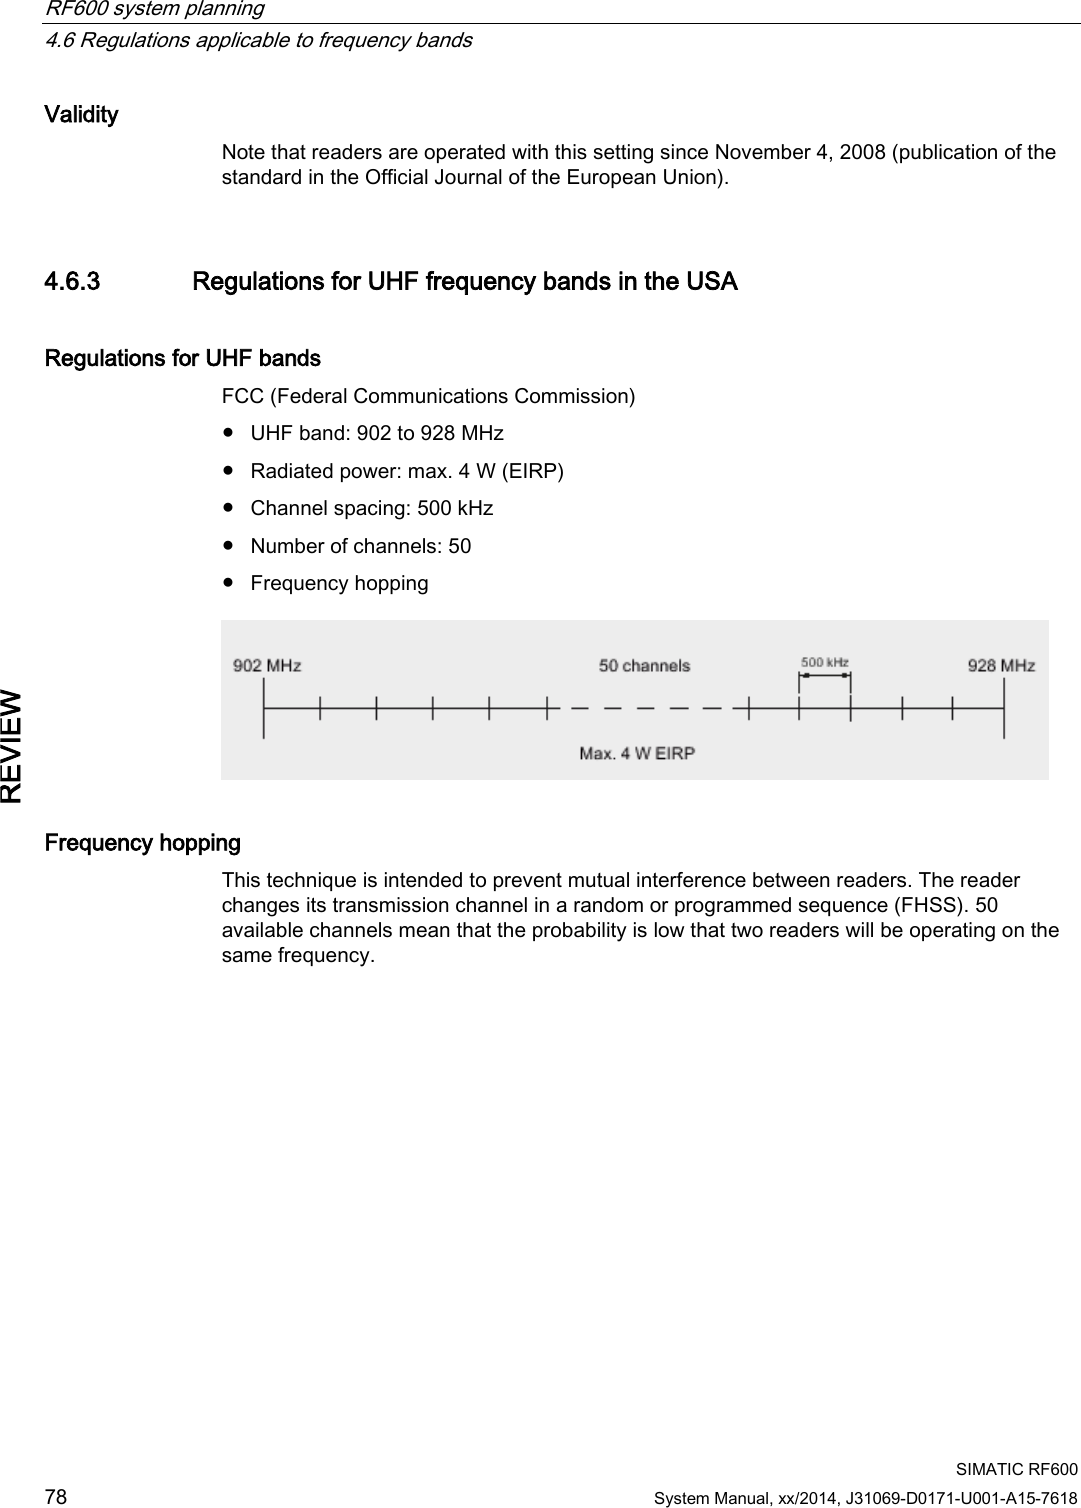 RF600 system planning   4.6 Regulations applicable to frequency bands  SIMATIC RF600 78 System Manual, xx/2014, J31069-D0171-U001-A15-7618 REVIEW Validity Note that readers are operated with this setting since November 4, 2008 (publication of the standard in the Official Journal of the European Union). 4.6.3 Regulations for UHF frequency bands in the USA Regulations for UHF bands FCC (Federal Communications Commission) ● UHF band: 902 to 928 MHz ● Radiated power: max. 4 W (EIRP) ● Channel spacing: 500 kHz ● Number of channels: 50 ● Frequency hopping  Frequency hopping This technique is intended to prevent mutual interference between readers. The reader changes its transmission channel in a random or programmed sequence (FHSS). 50 available channels mean that the probability is low that two readers will be operating on the same frequency. 